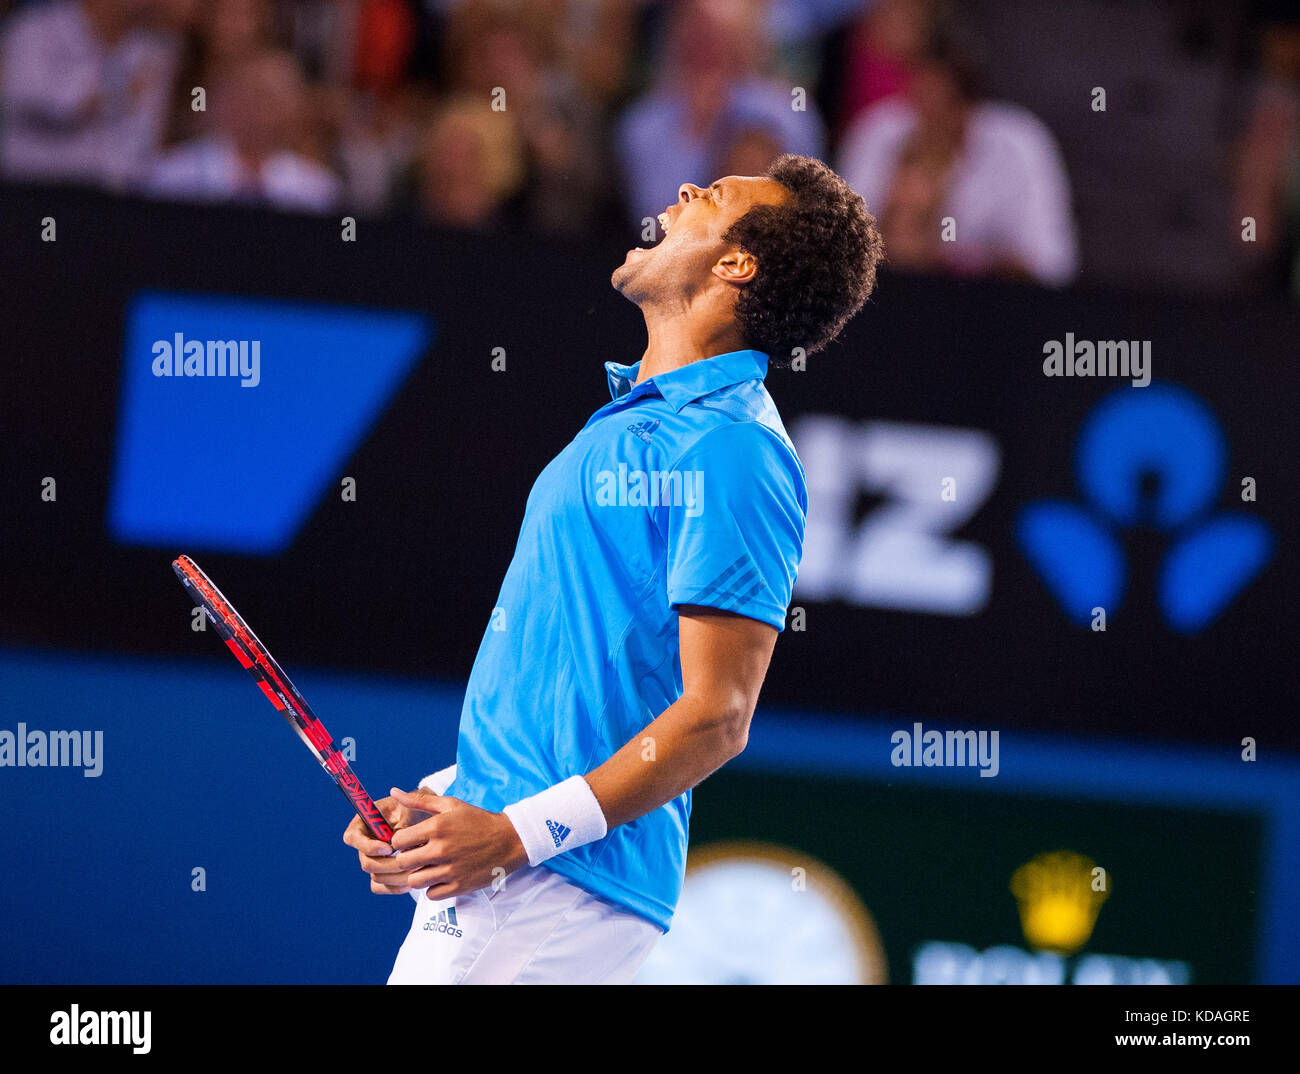 Jo-Wilifried Tsonga faced R. Federer (SUI) the fourth round of the 2014 Australian Open Men's Singles. Billed as a grudge match between rivals, Federe Stock Photo